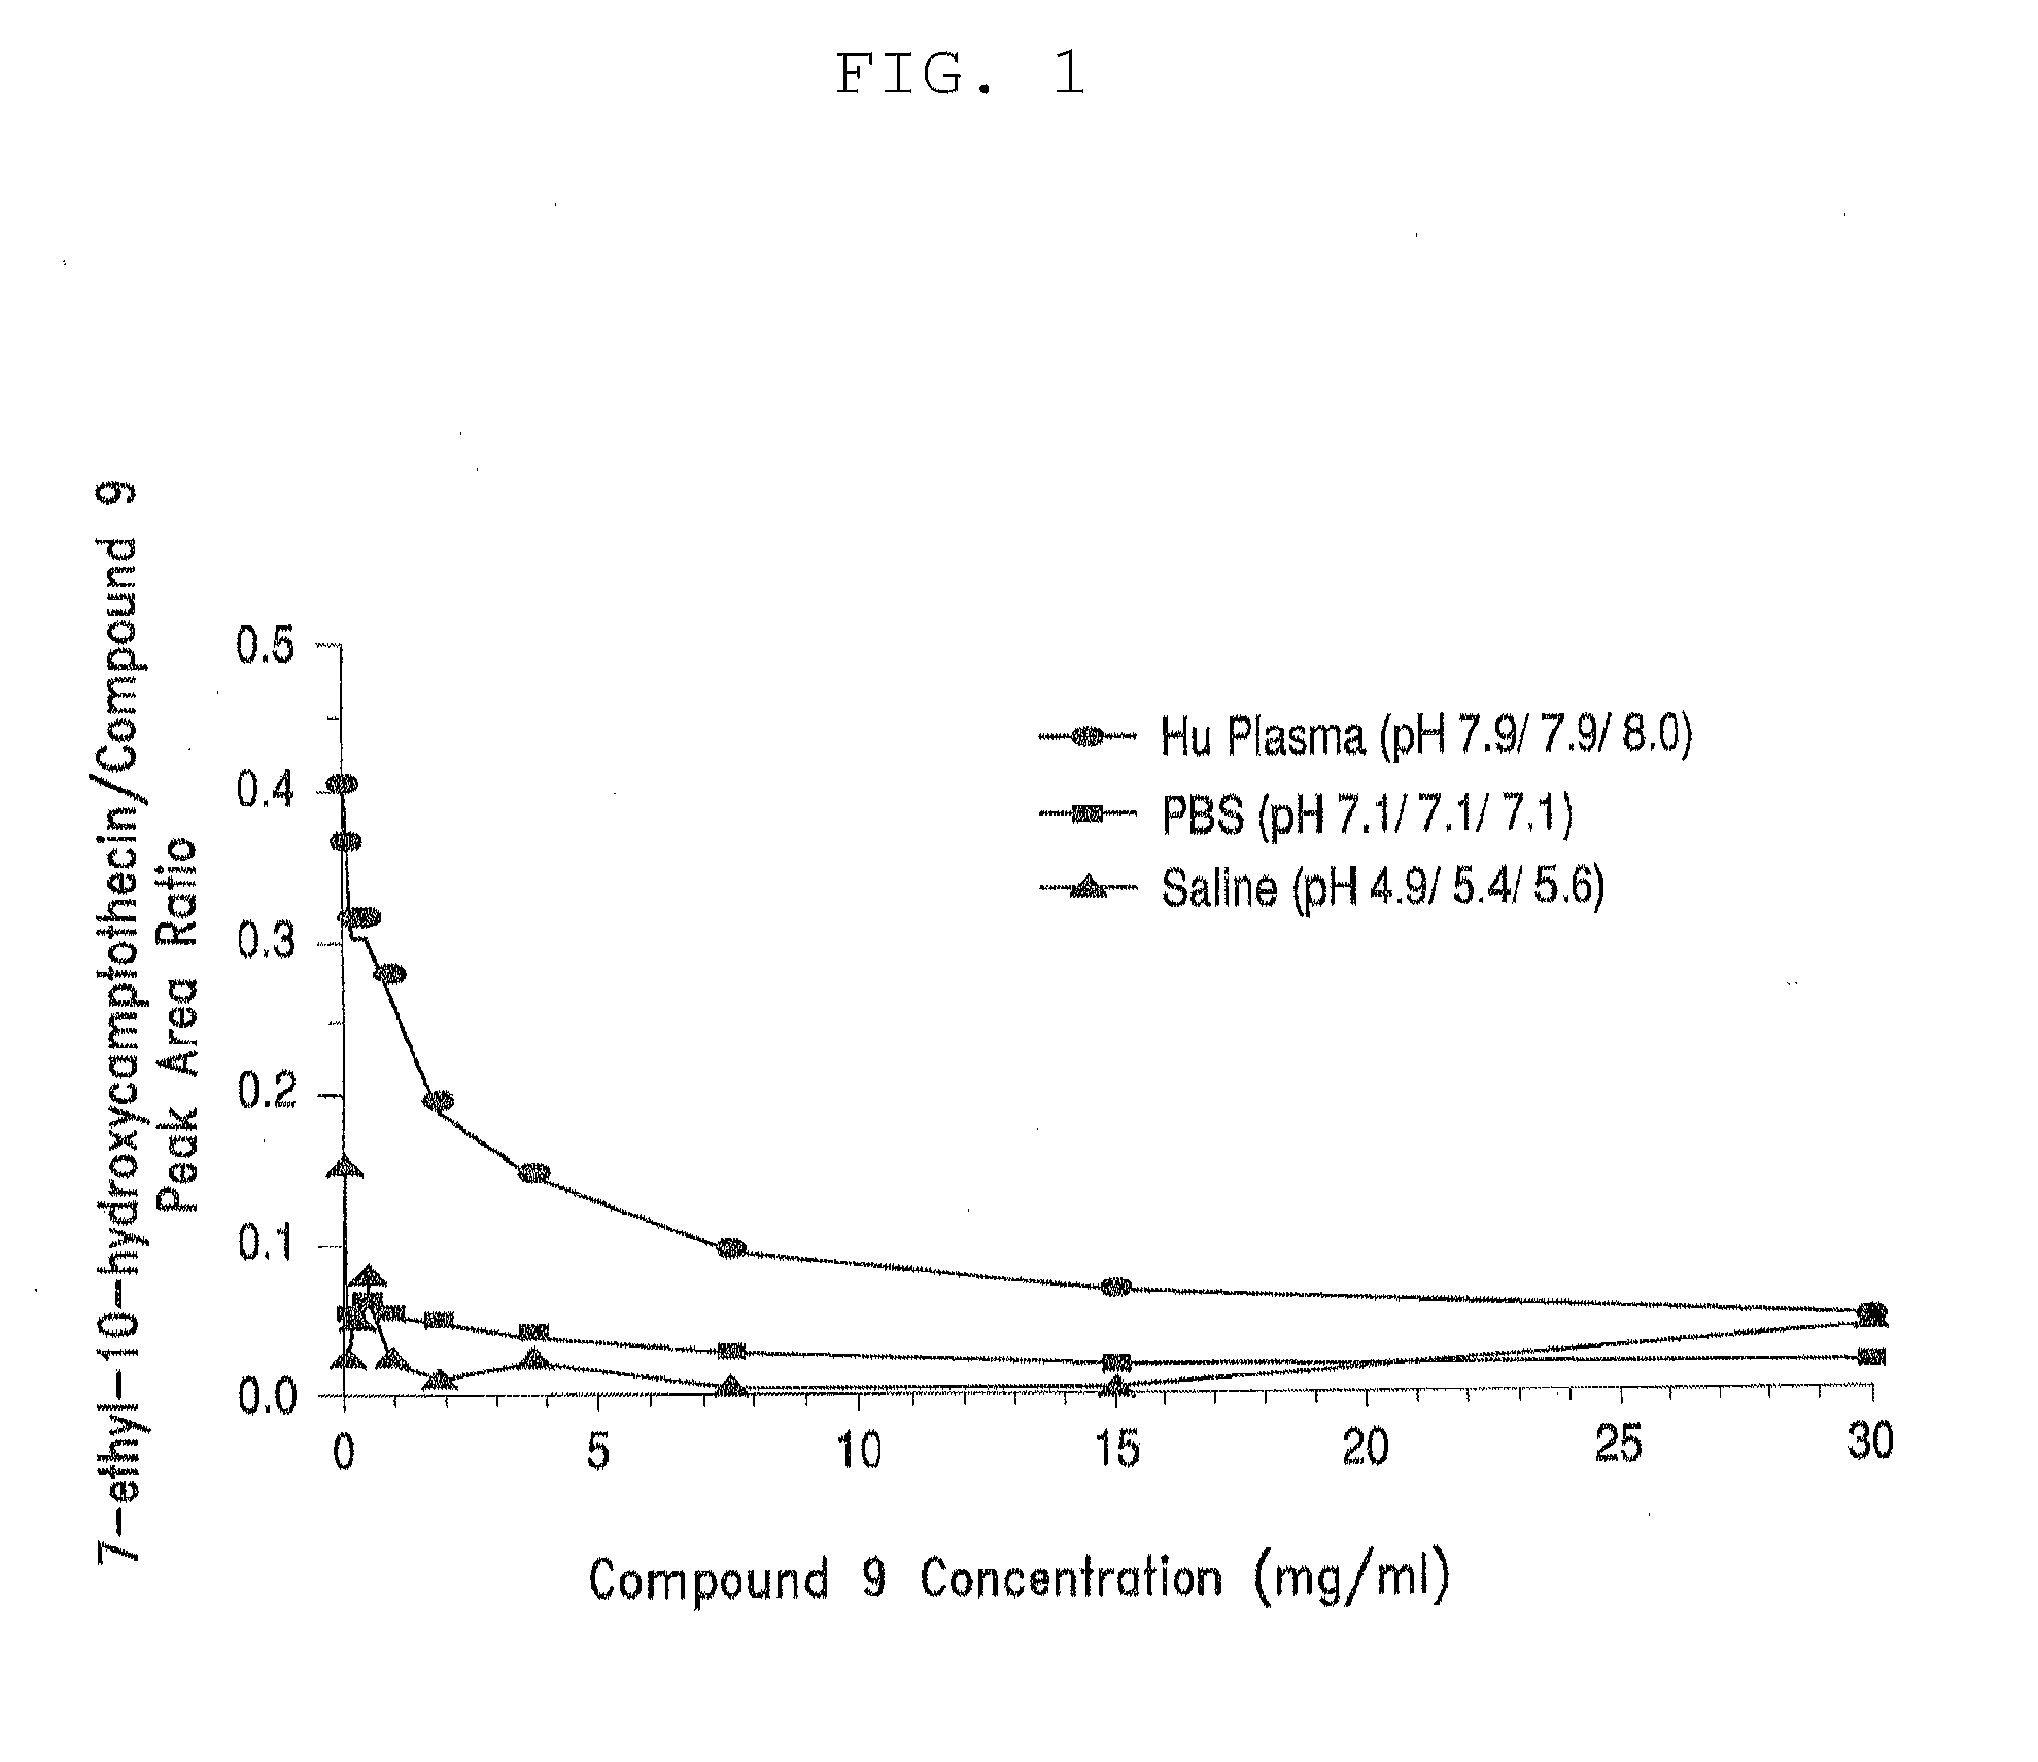 Methods of treating her2 positive cancer with her2 receptor antagonist in combination with multi-arm polymeric conjugates of 7-ethyl-10-hydroxycamptothecin